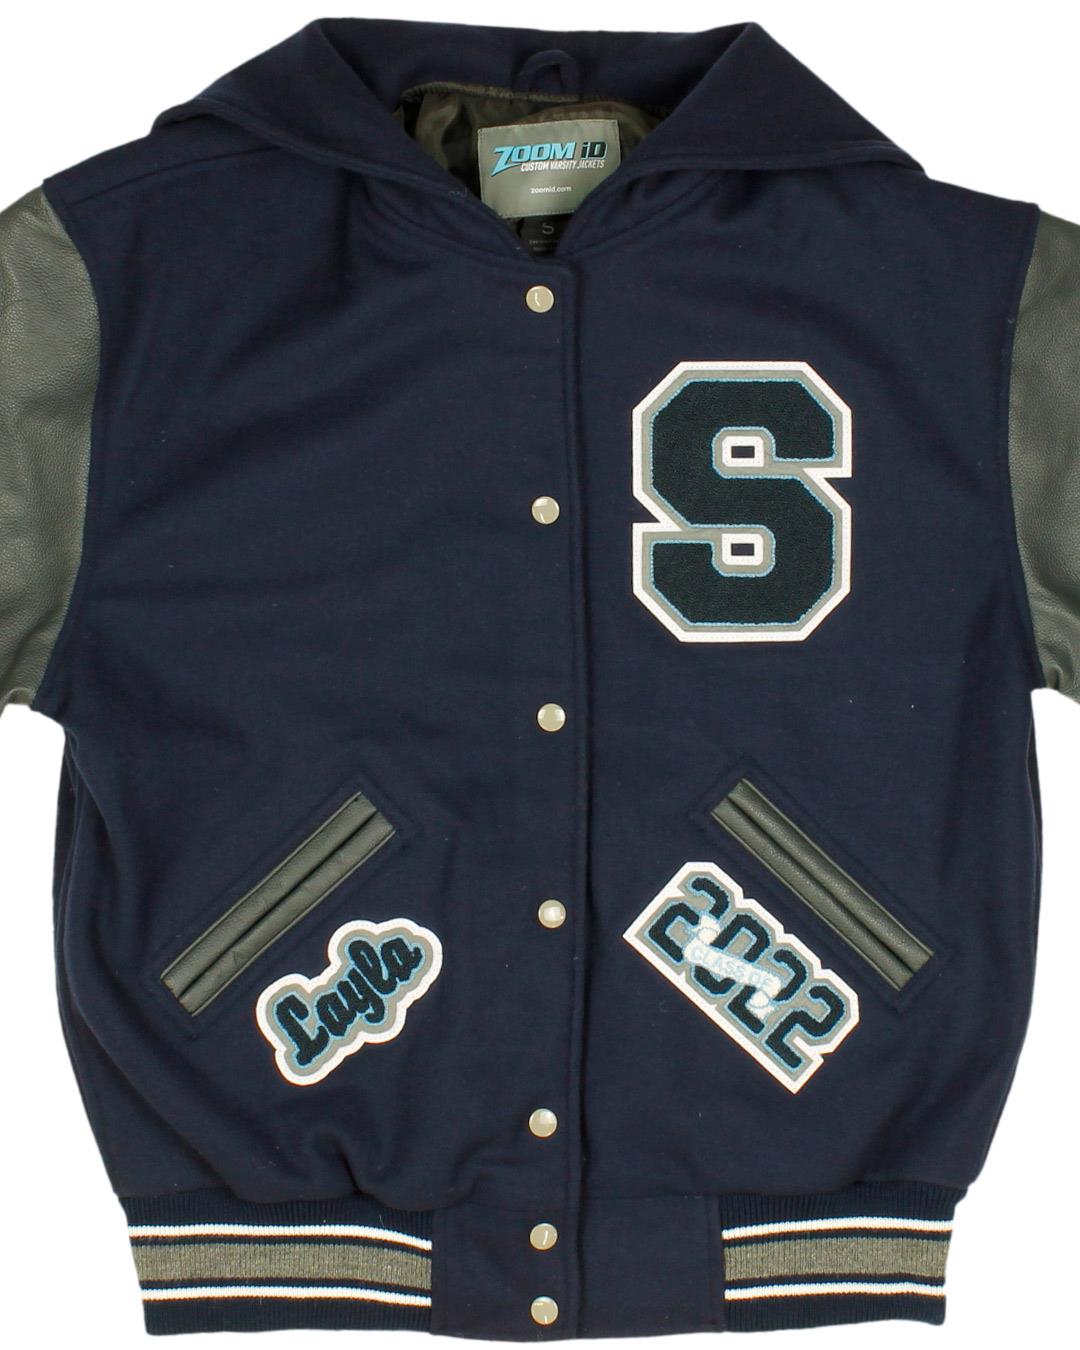 Silver High School Letter Jacket, Silver City NM - Front